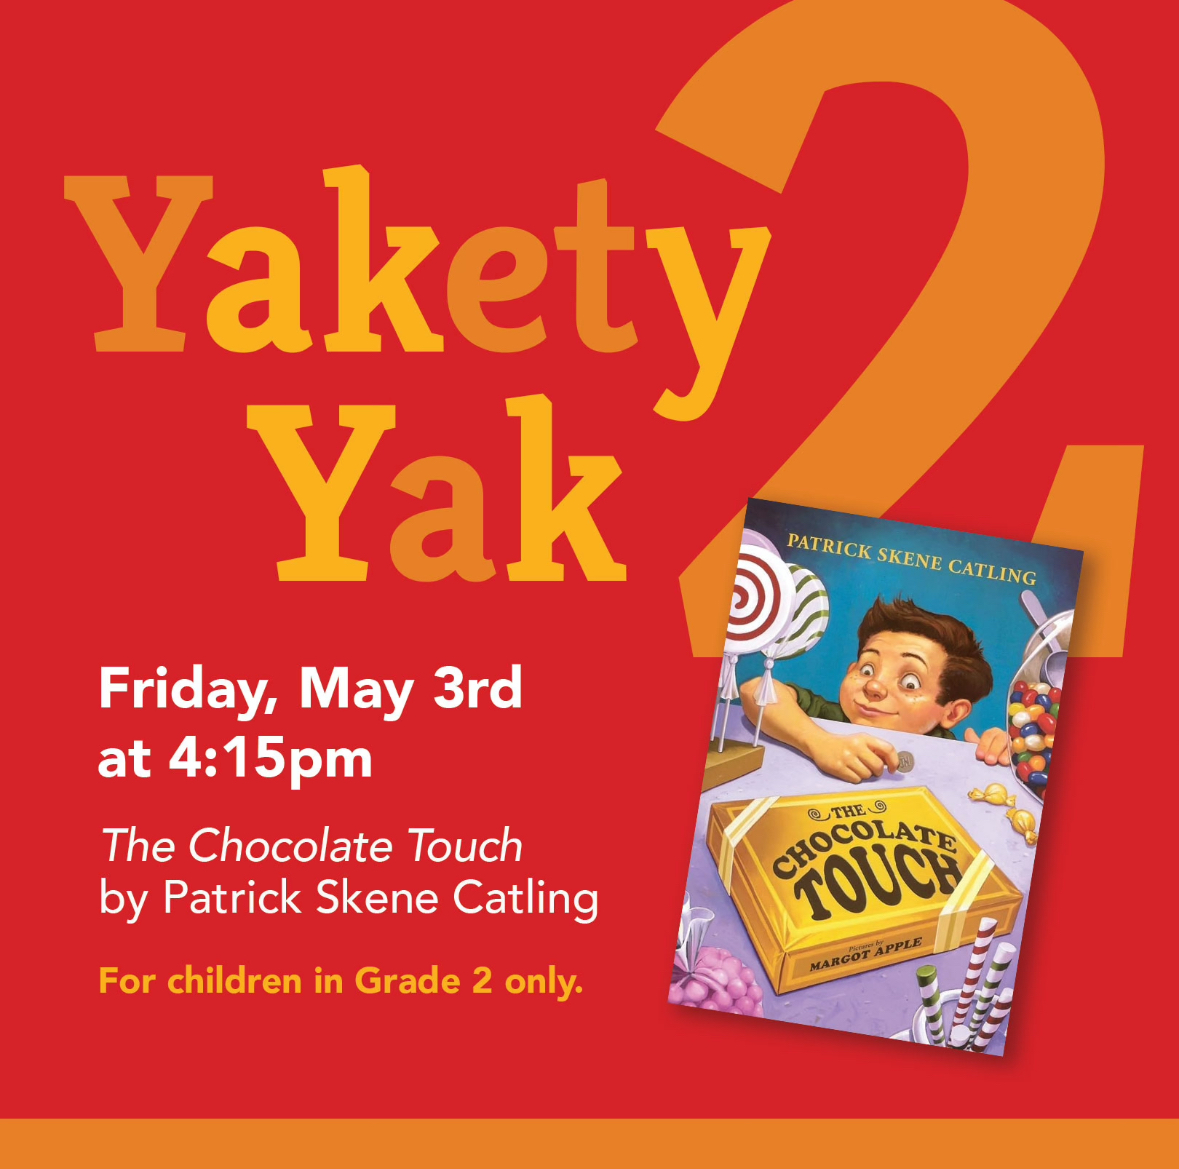 Visit our website to register. Please email tjersey@henhudfreelibrary.org upon registering for your free copy of the book!

#yaketyyak #thechocolatetouch #patrickskenecatling #hhﬂ #librariesrock